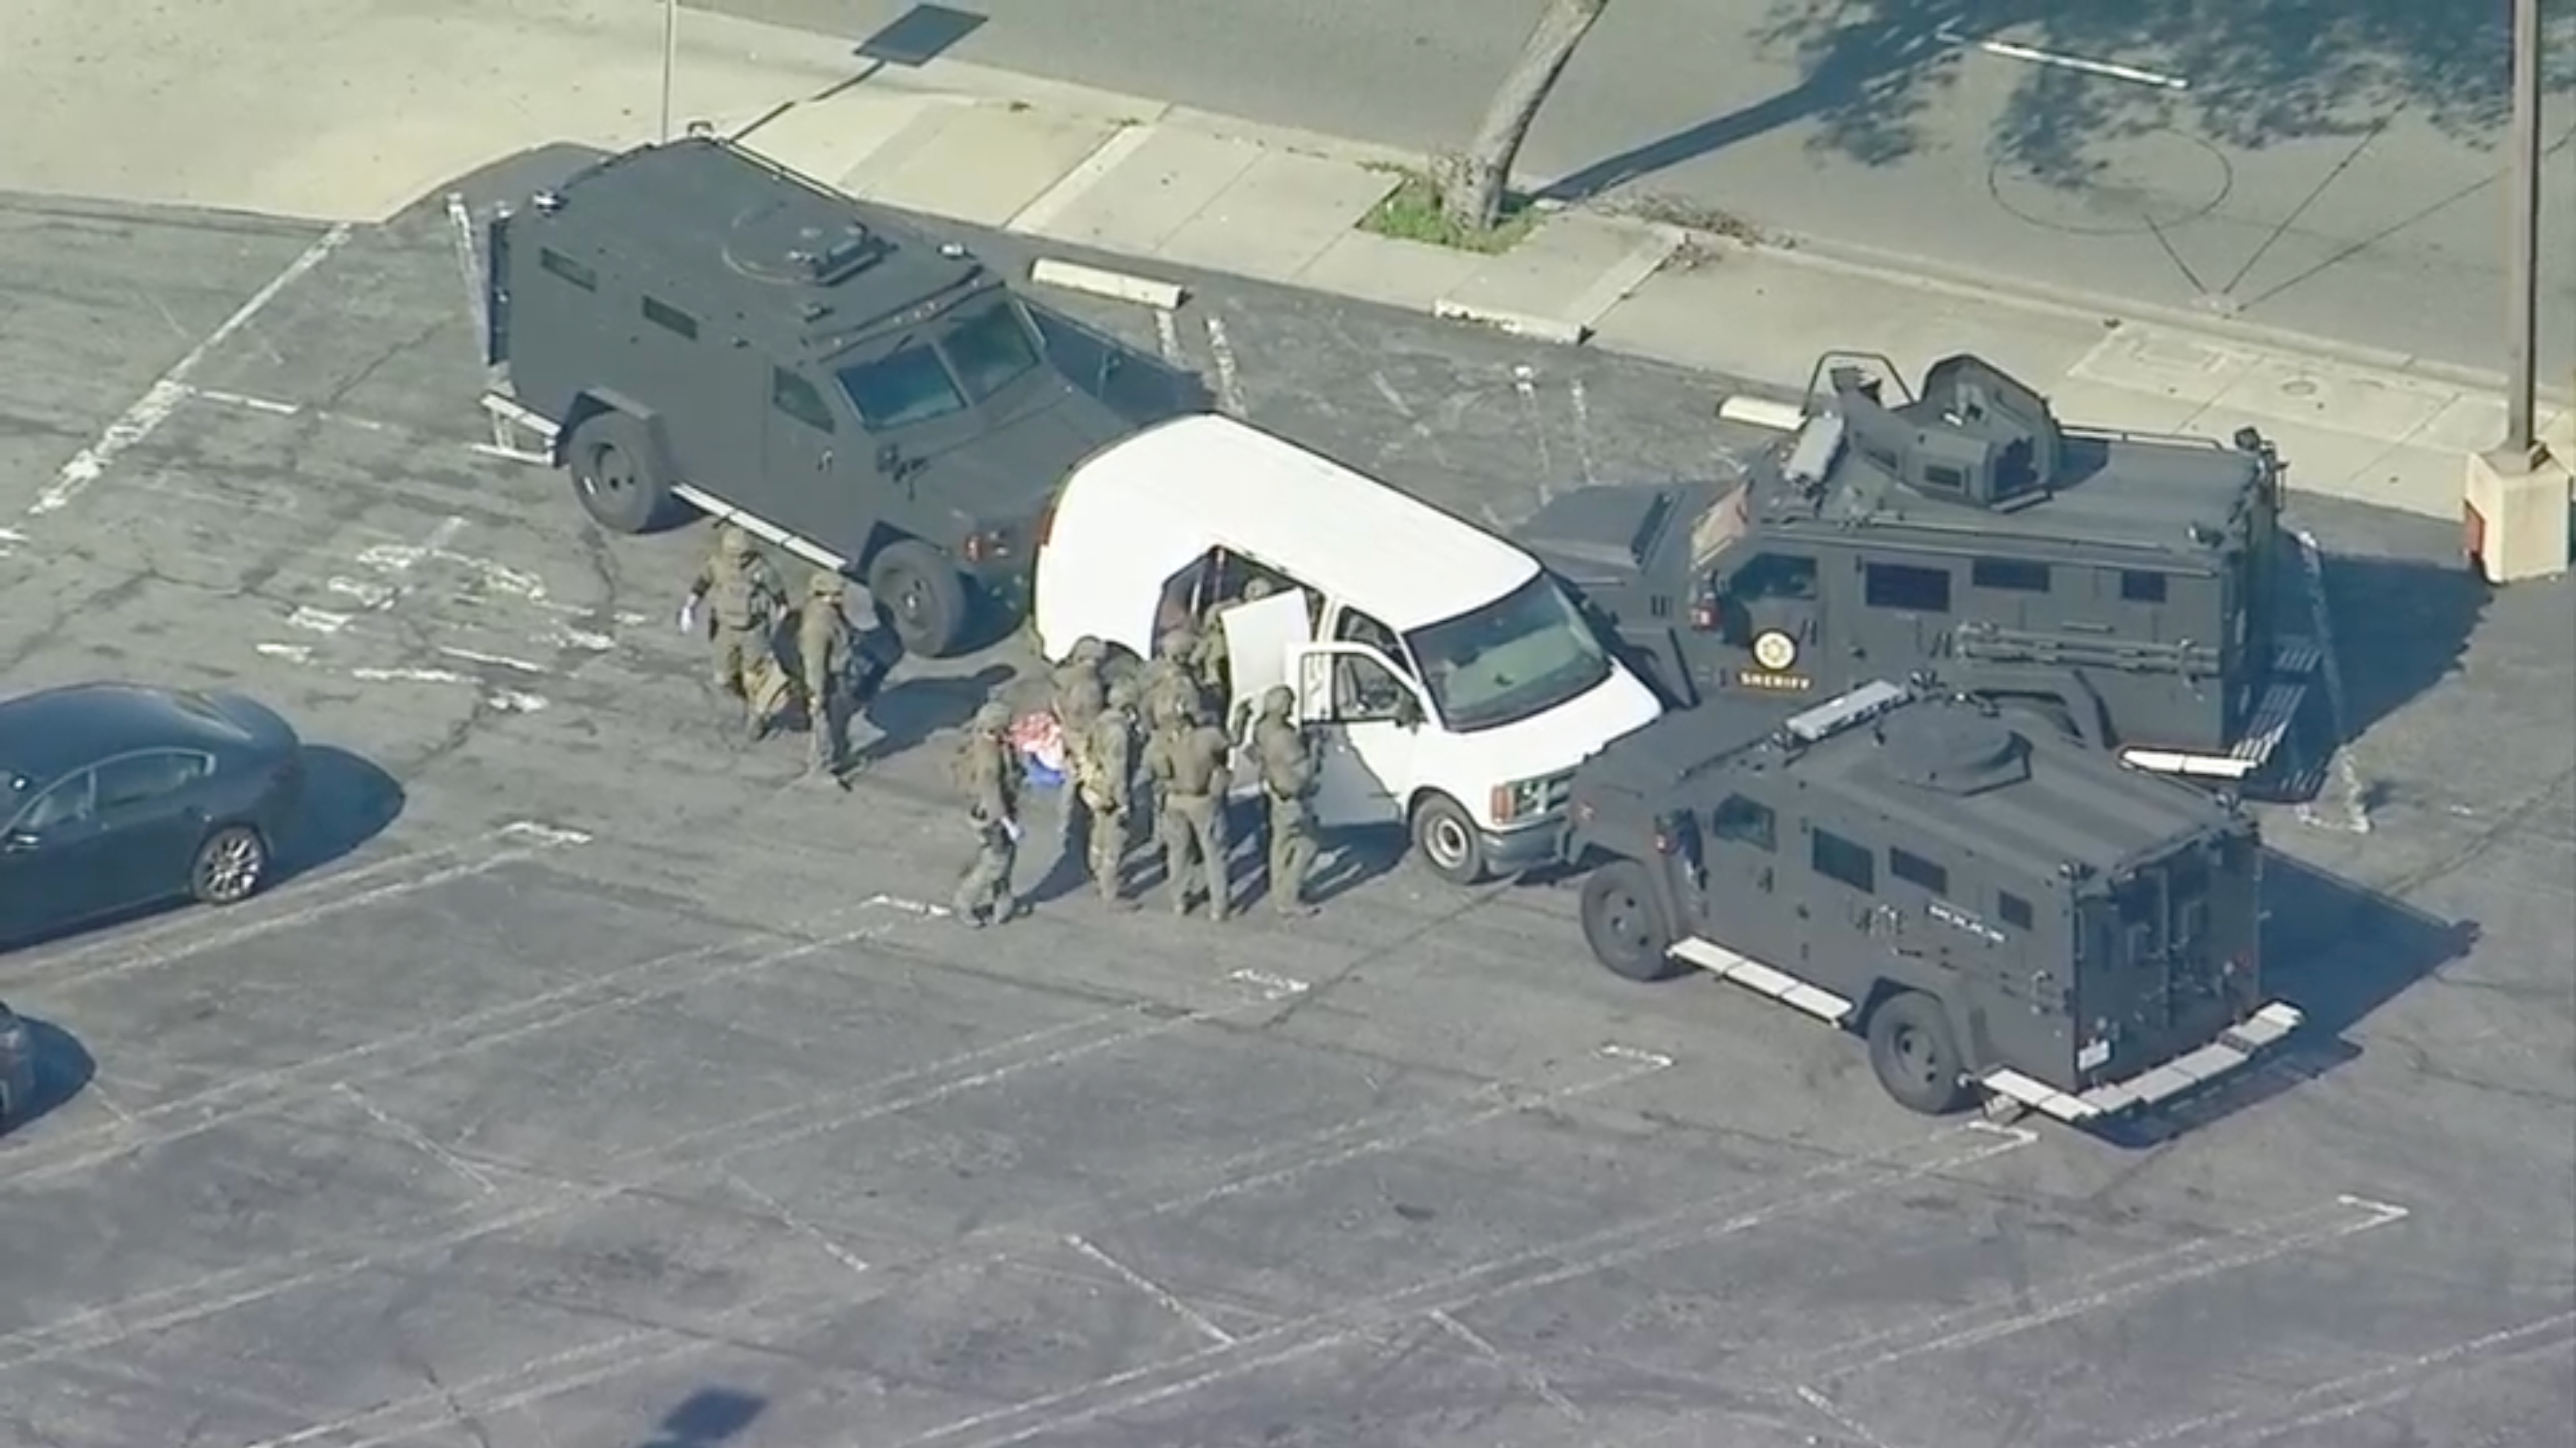 A tactical team searches a white cargo van during a standoff with officers in Torrance, California on Sunday.